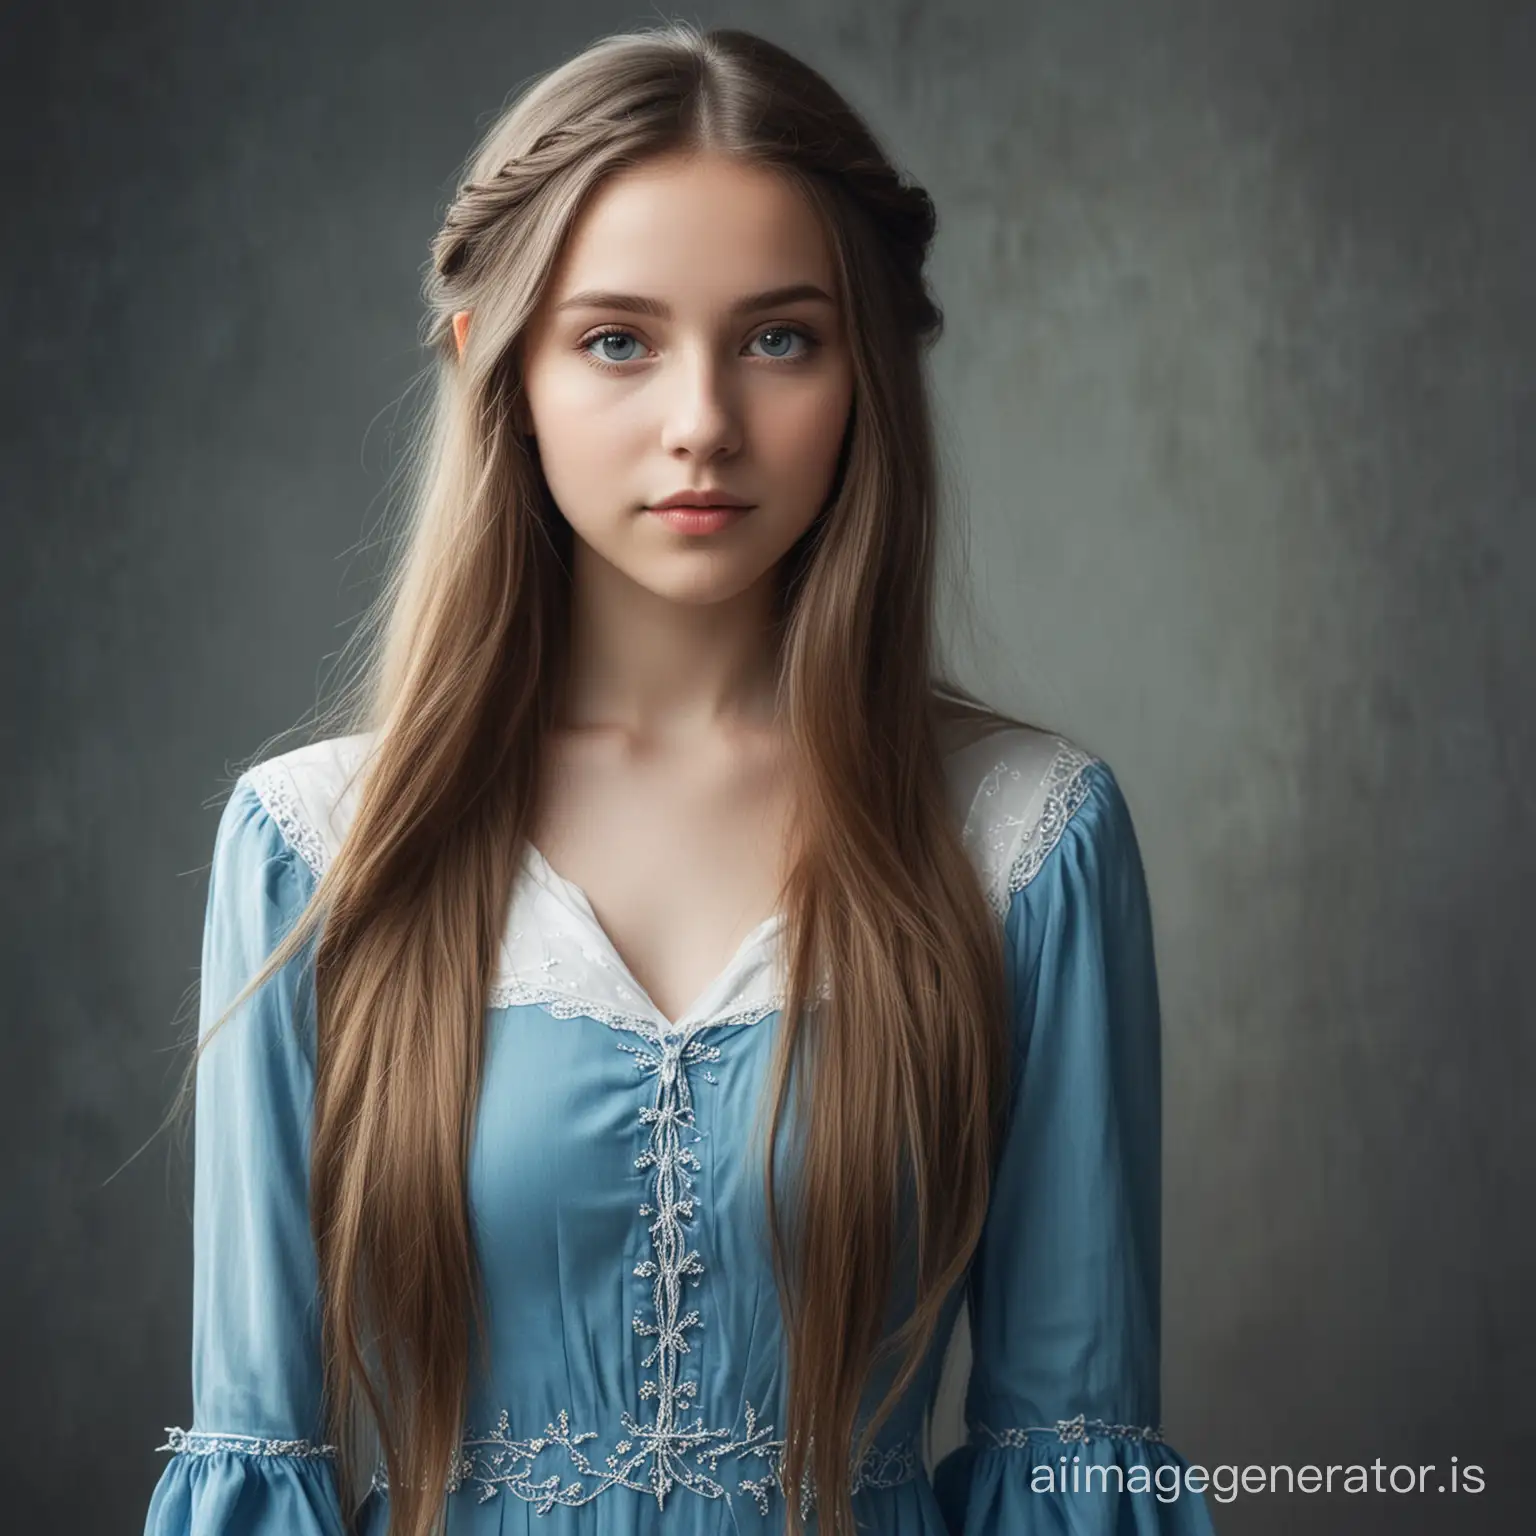 girl with long hair, blue long dress and white like a elf portrait